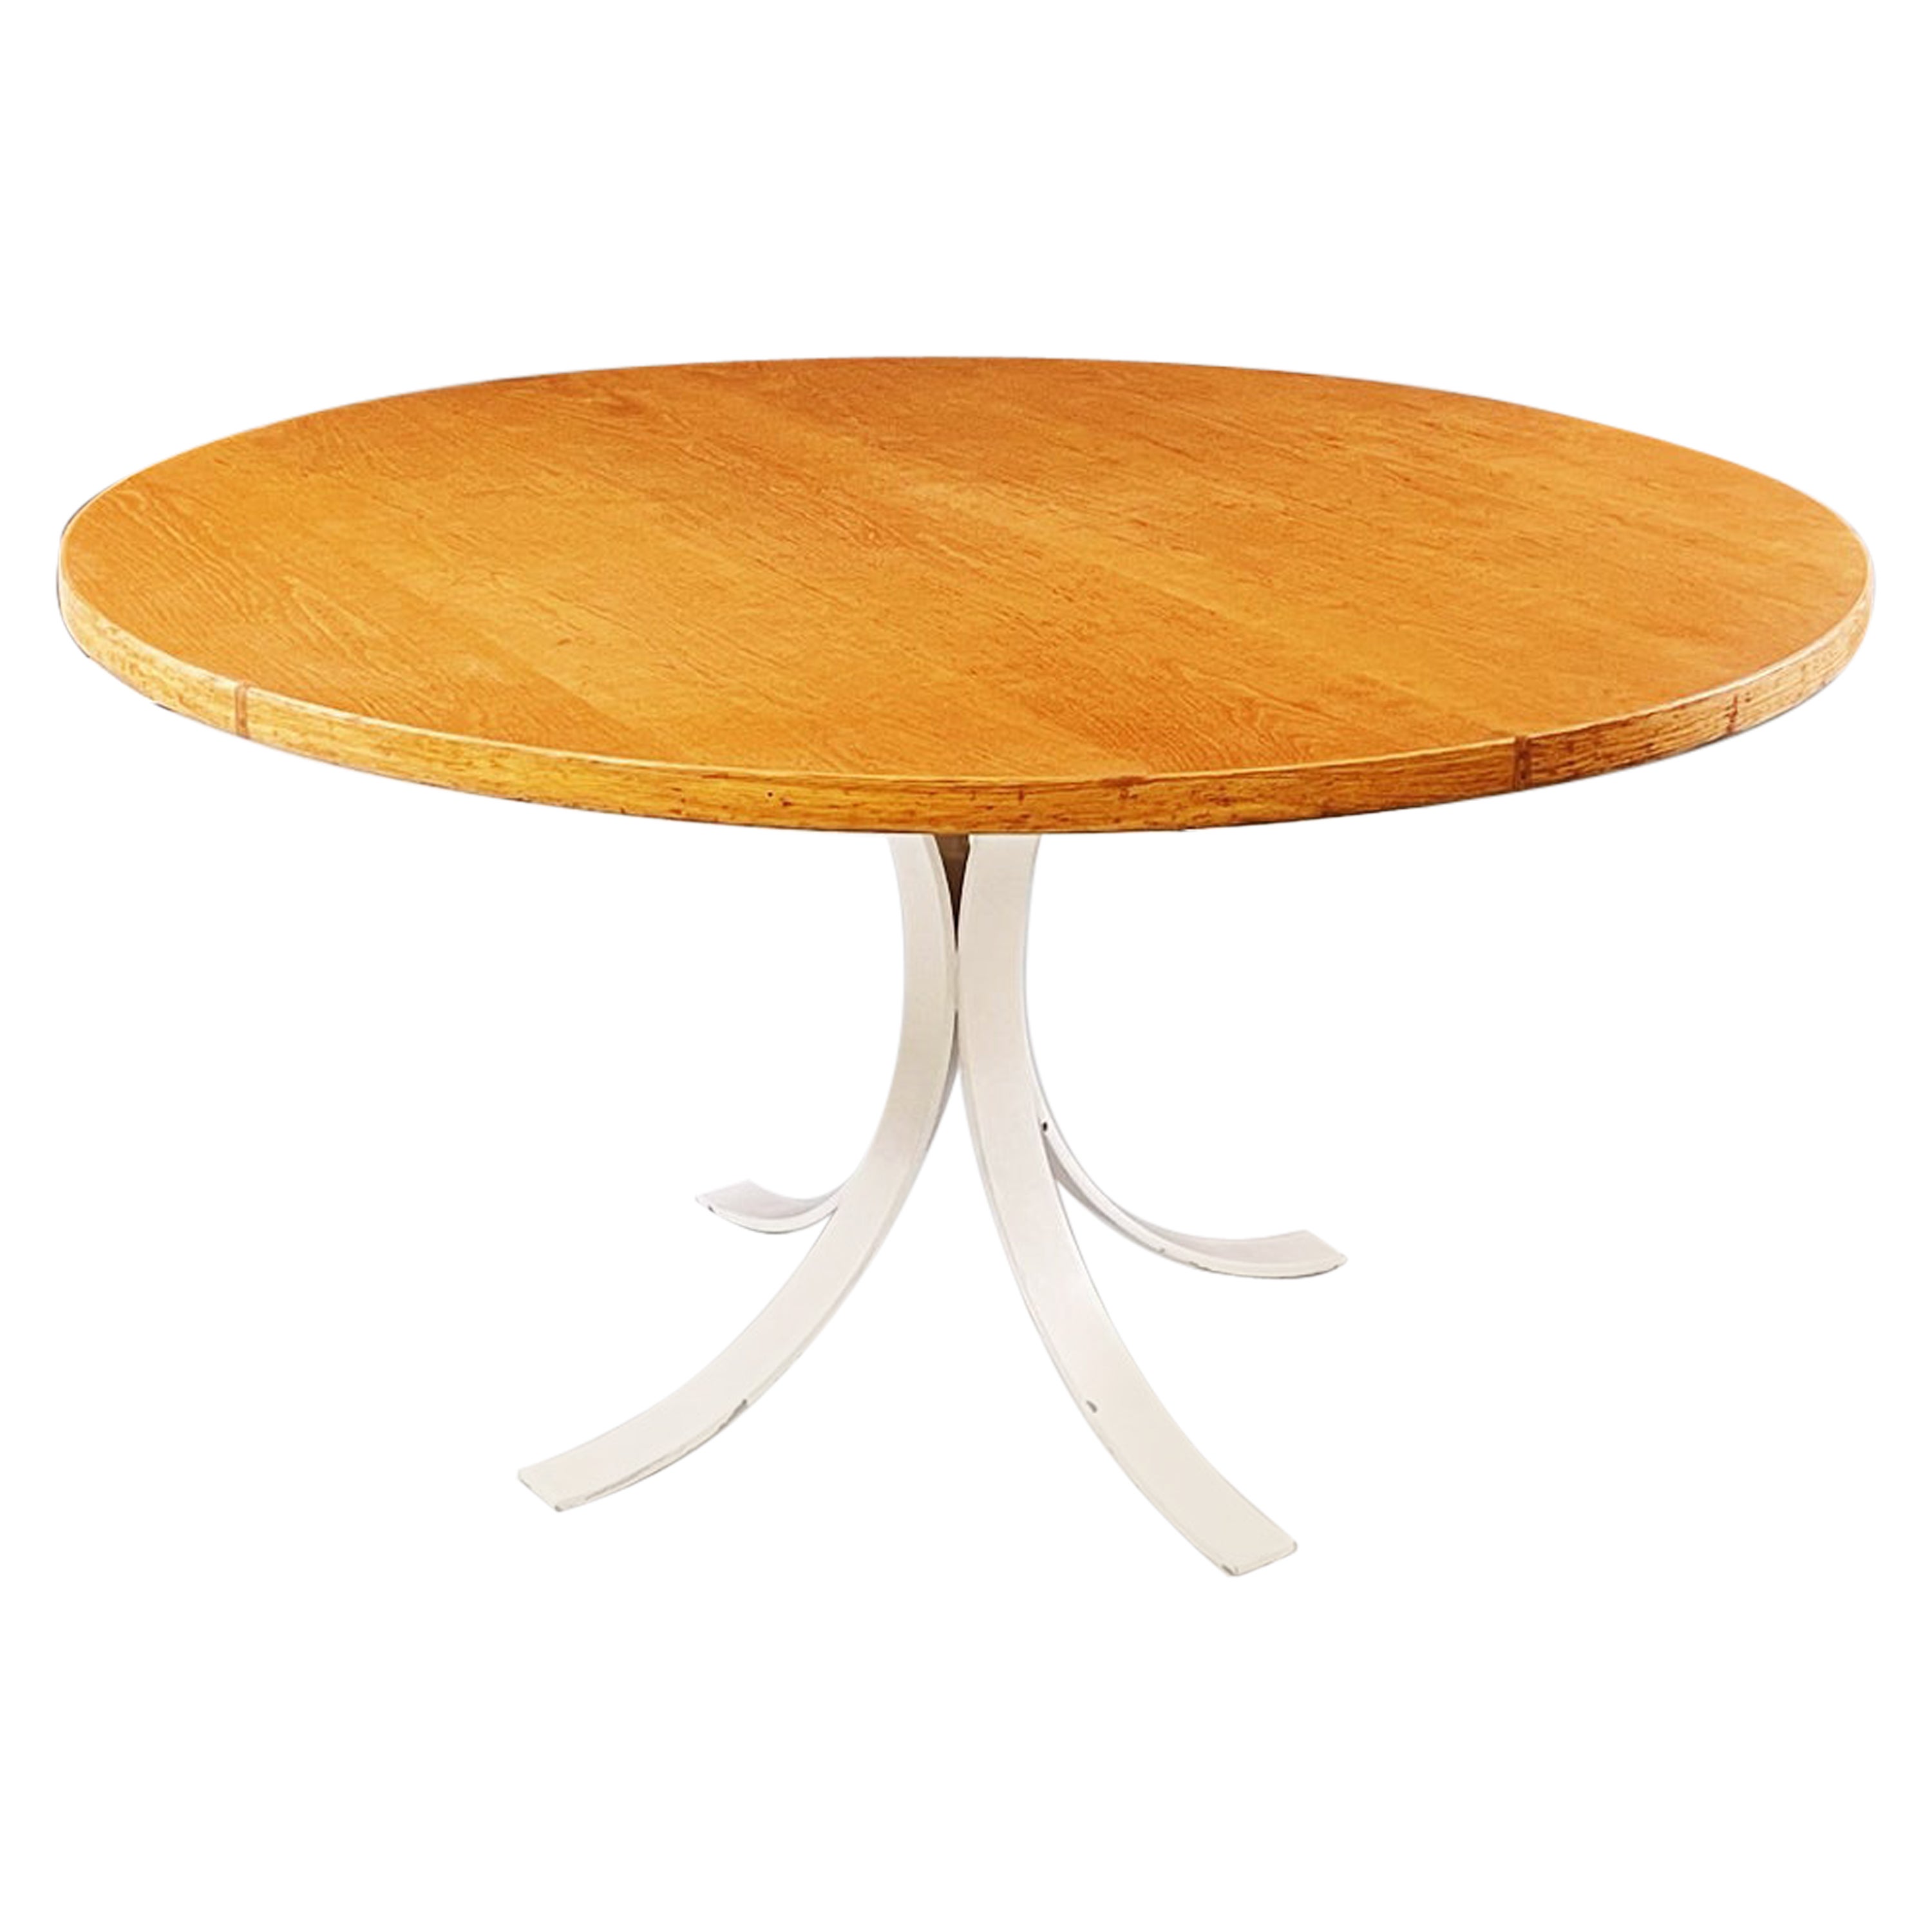 Italian Modern Round Dining Table in White Metal and Solid Wood, 1970s